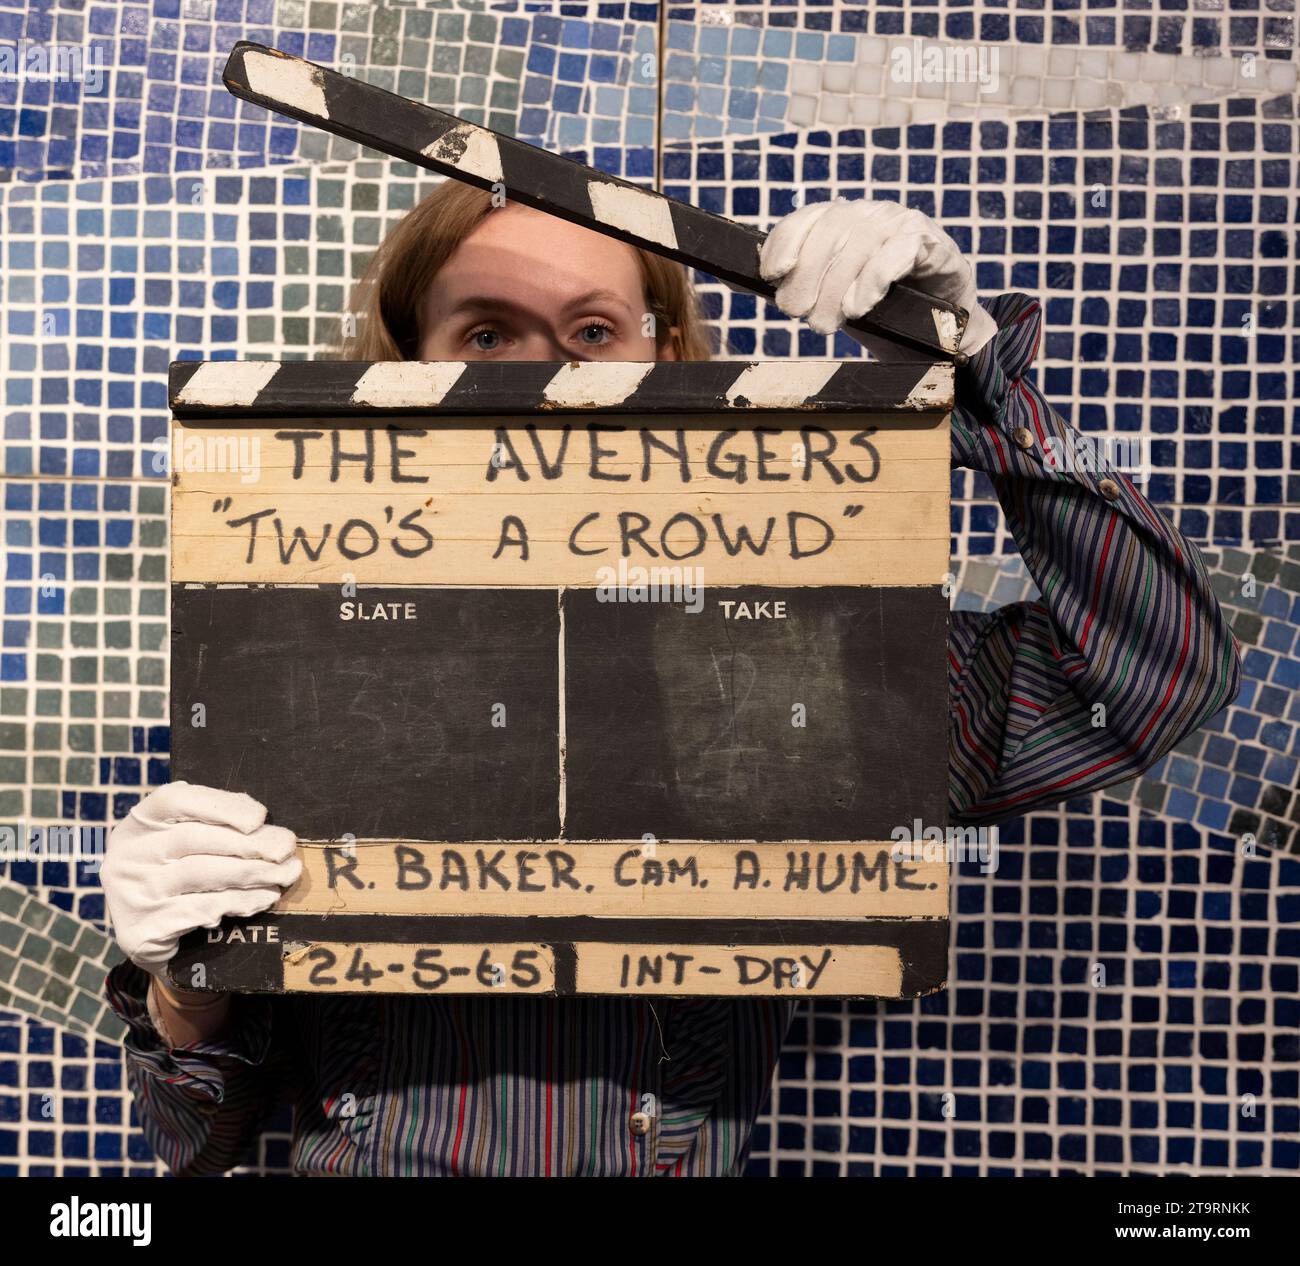 London, UK. 27th Nov, 2023. The Rock, Pop & Film sale preview takes place at Bonhams Knightsbridge for the sale on 29 November. Highlights include: The Avengers: Clapper Board from the production of episode Two's A Crowd, ABC, 1965. Estimate £1,500-2,000. Credit: Malcolm Park/Alamy Live News Stock Photo